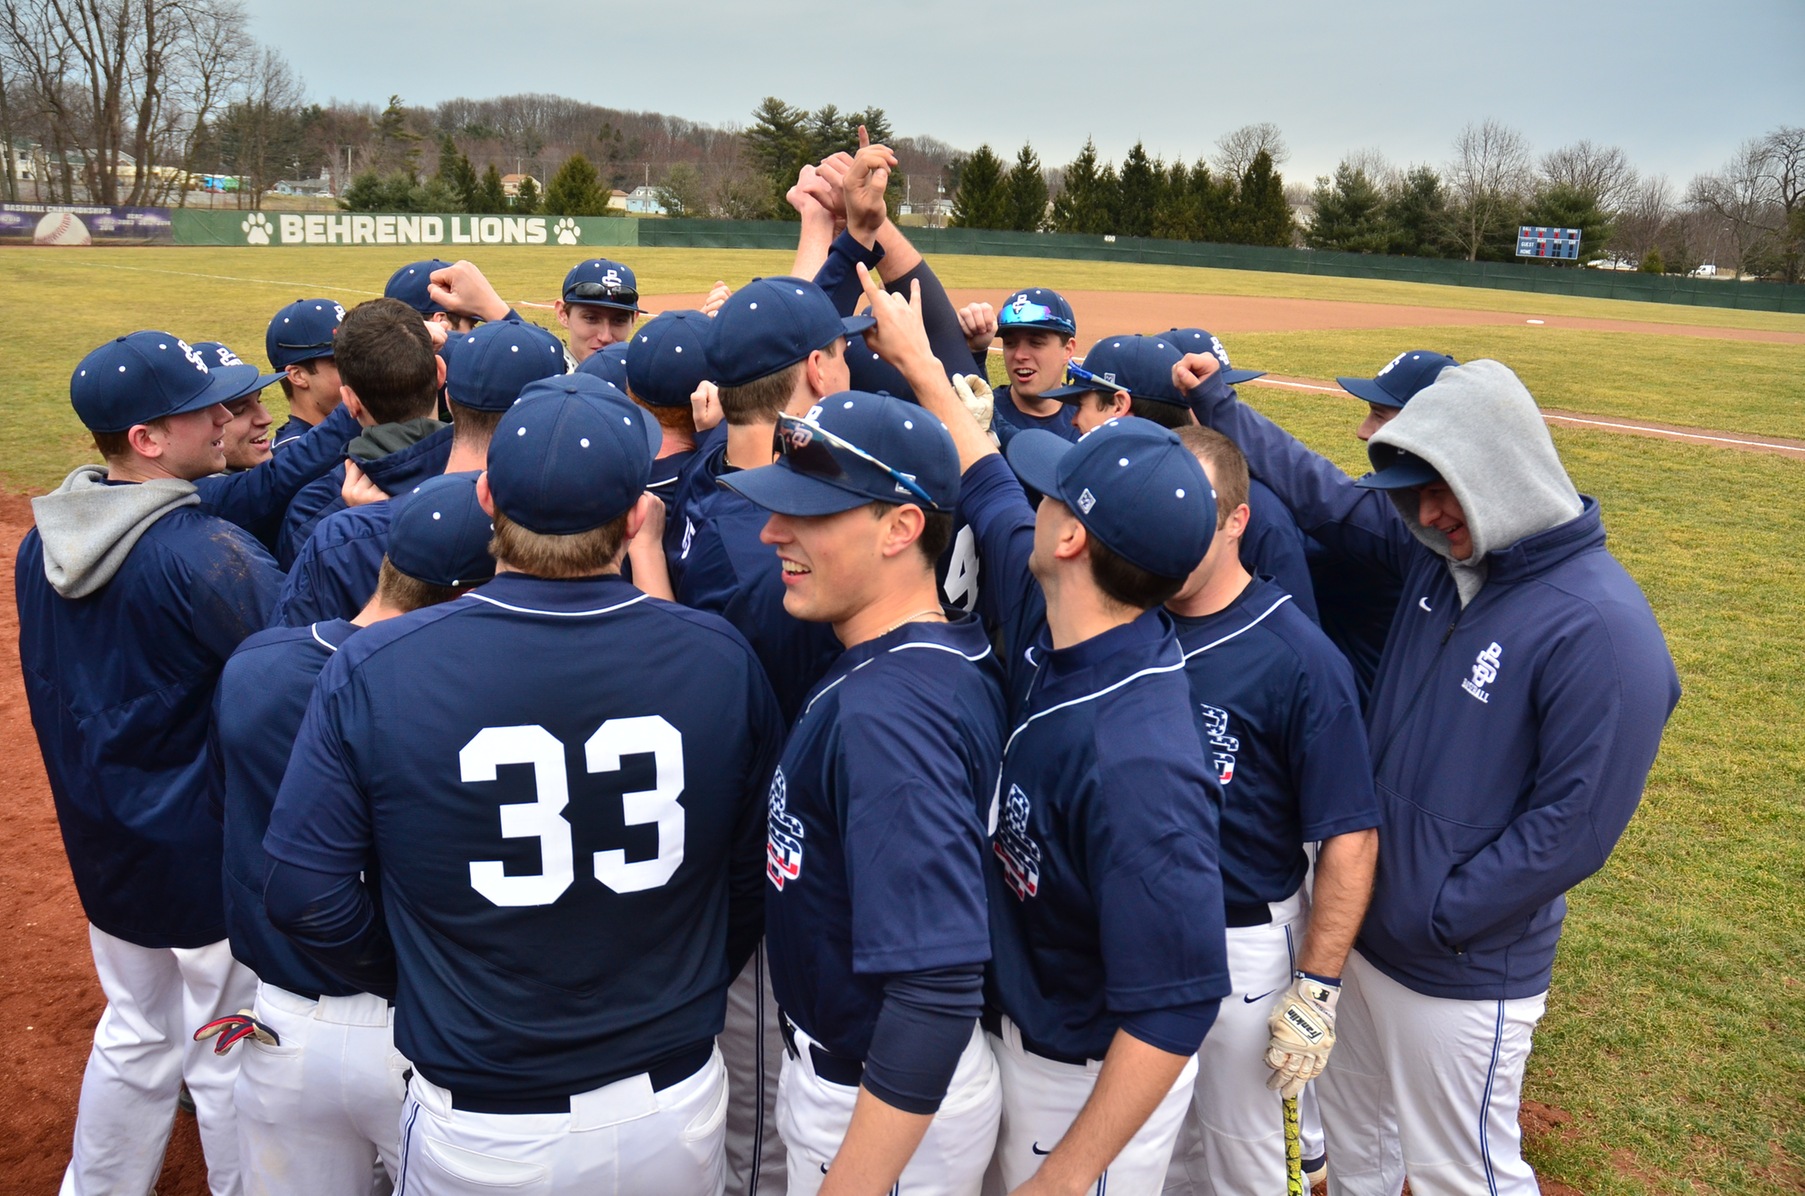 Baseball Travels to D'Youville Wednesday